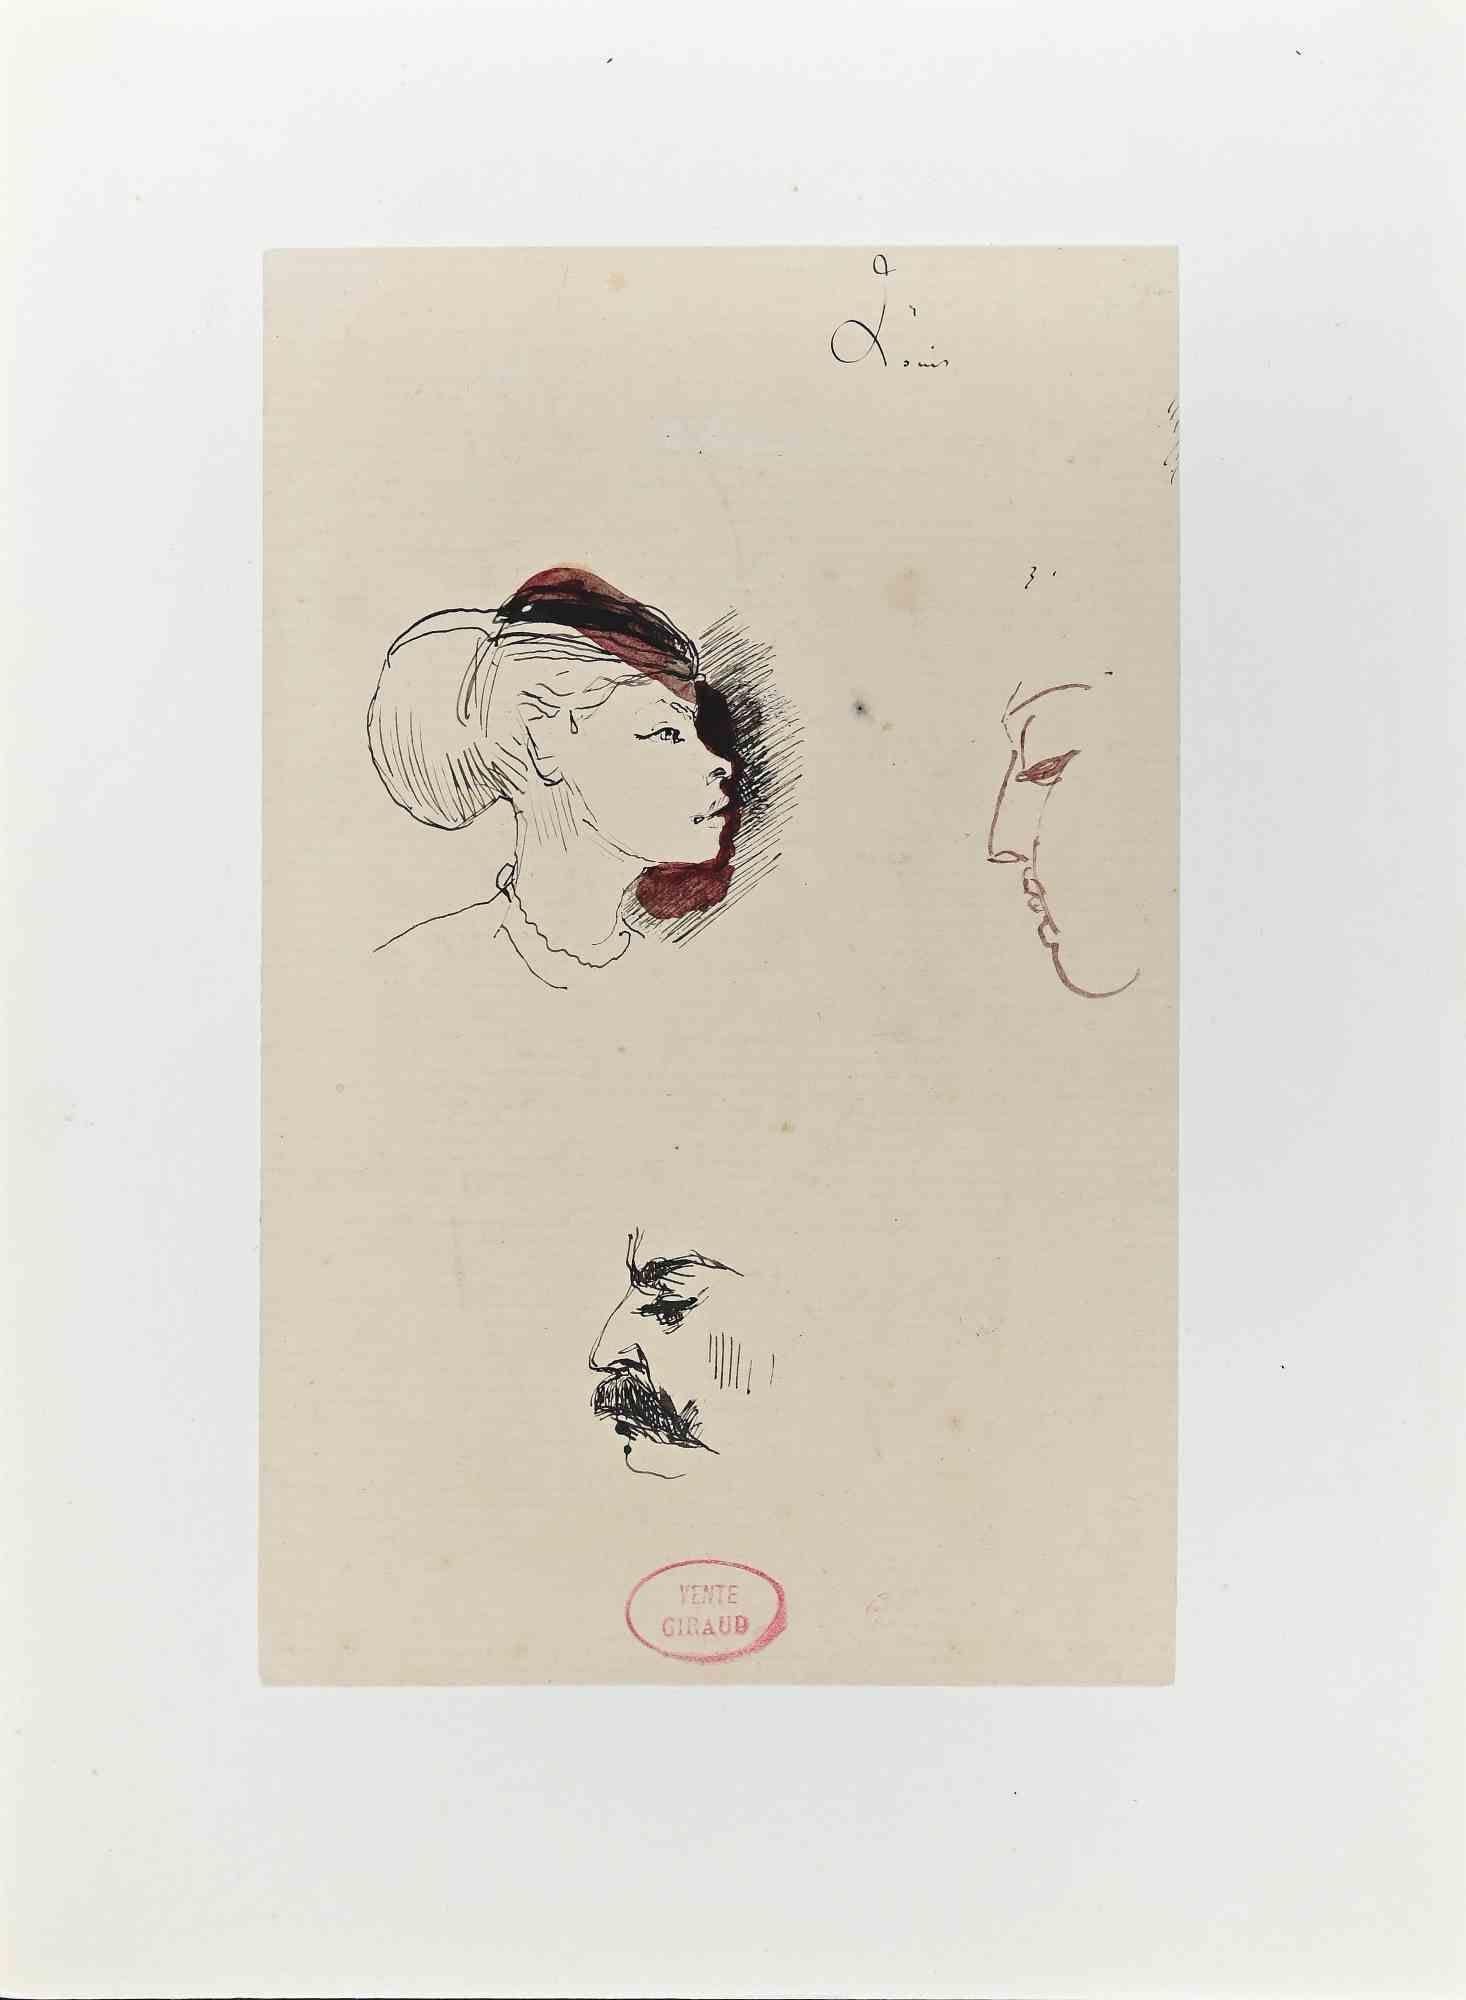 Profiles is an Original Drawing in Ink and watercolor realized by Eugène Giraud in the Late 19th Century.

Good conditions.

The delicate and beautiful fine strokes form the artwork. The mastery of the artist is represented by the expression of the